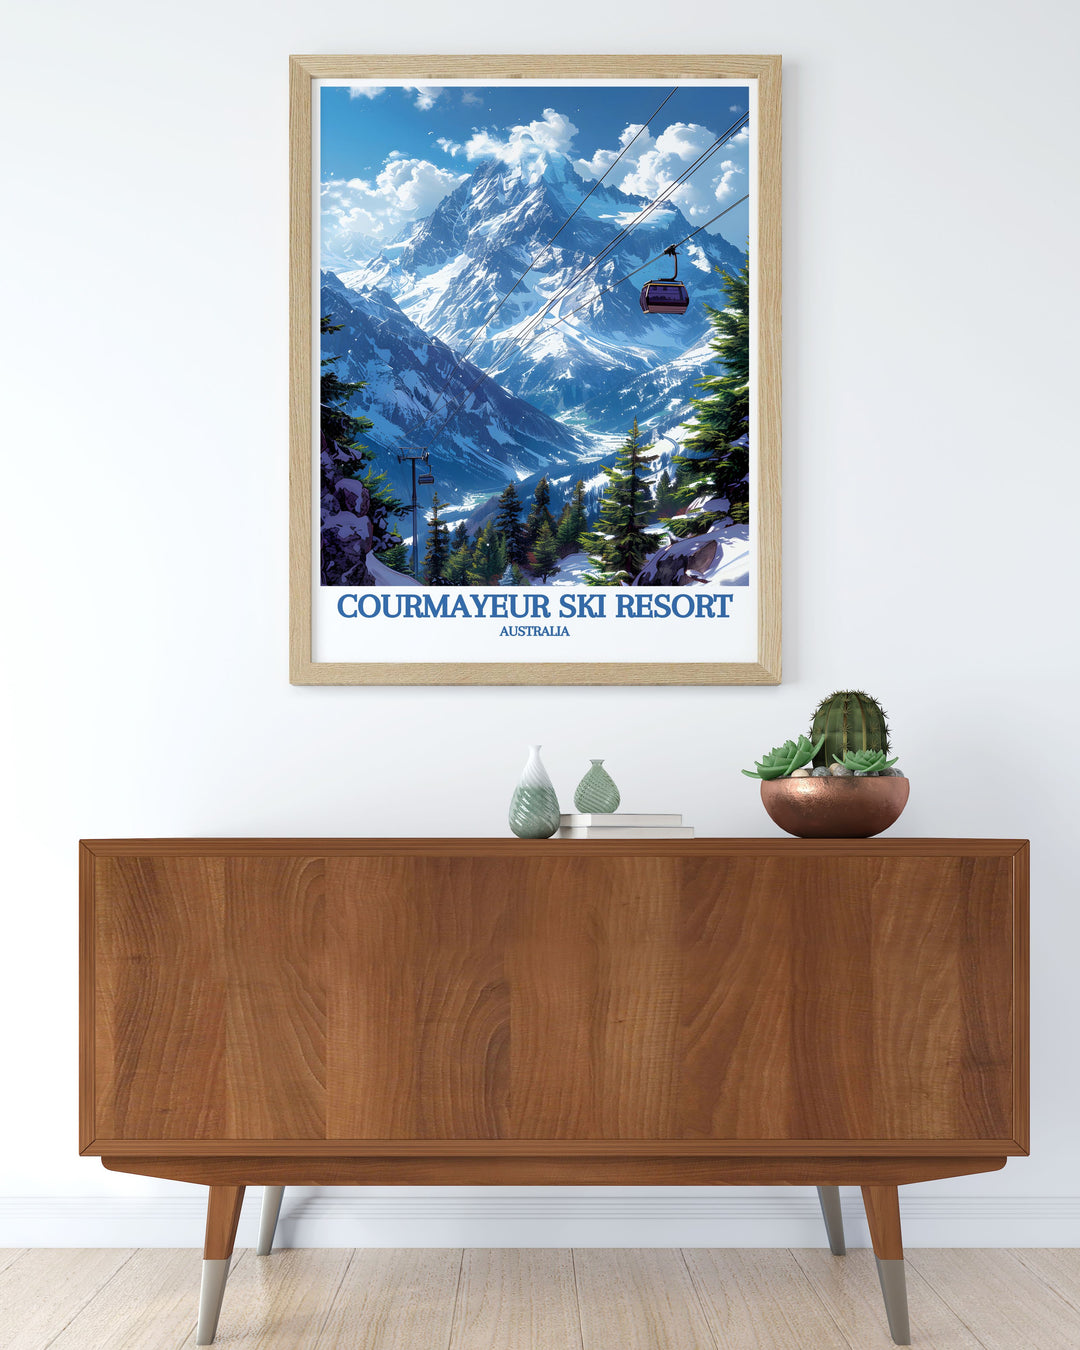 Featuring breathtaking views of Courmayeur Ski Resort and the iconic Mont Blanc, this poster is perfect for those who wish to bring a piece of Italys natural splendor and skiing heritage into their home.